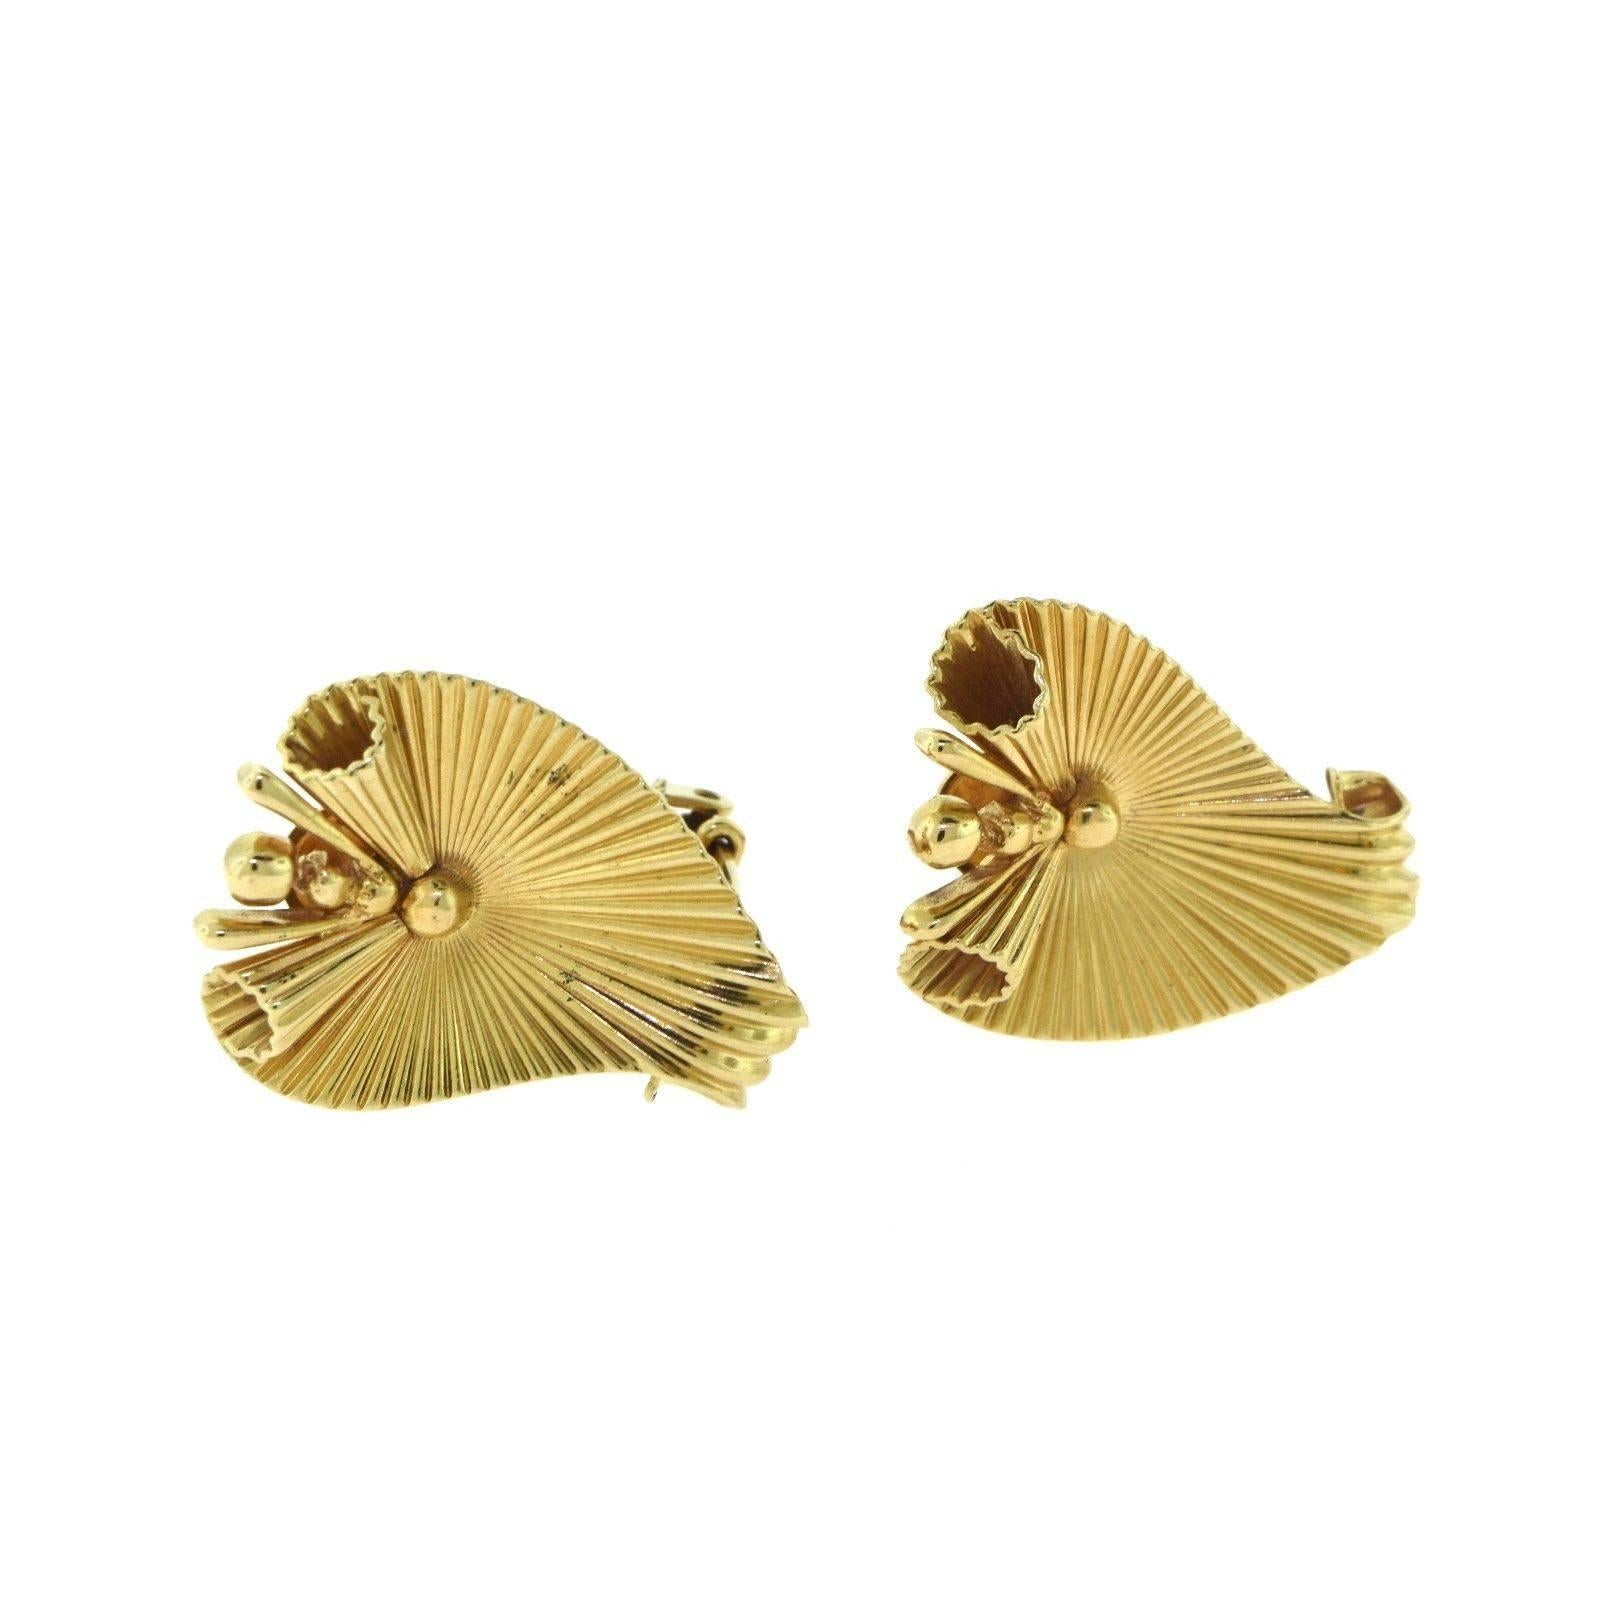 Designer: Cartier

Era: Estate

Style: Fluted 

Metal: Yellow Gold

Metal Purity: 14k 

Total Item Weight (g): 9.6

Earring Dimensions: 1.0 x 0.75 inches

Earring Thickness: 0.54 mm

Hallmark: 14k Serial No.  (Blocked for Privacy)

Signature: Cartier